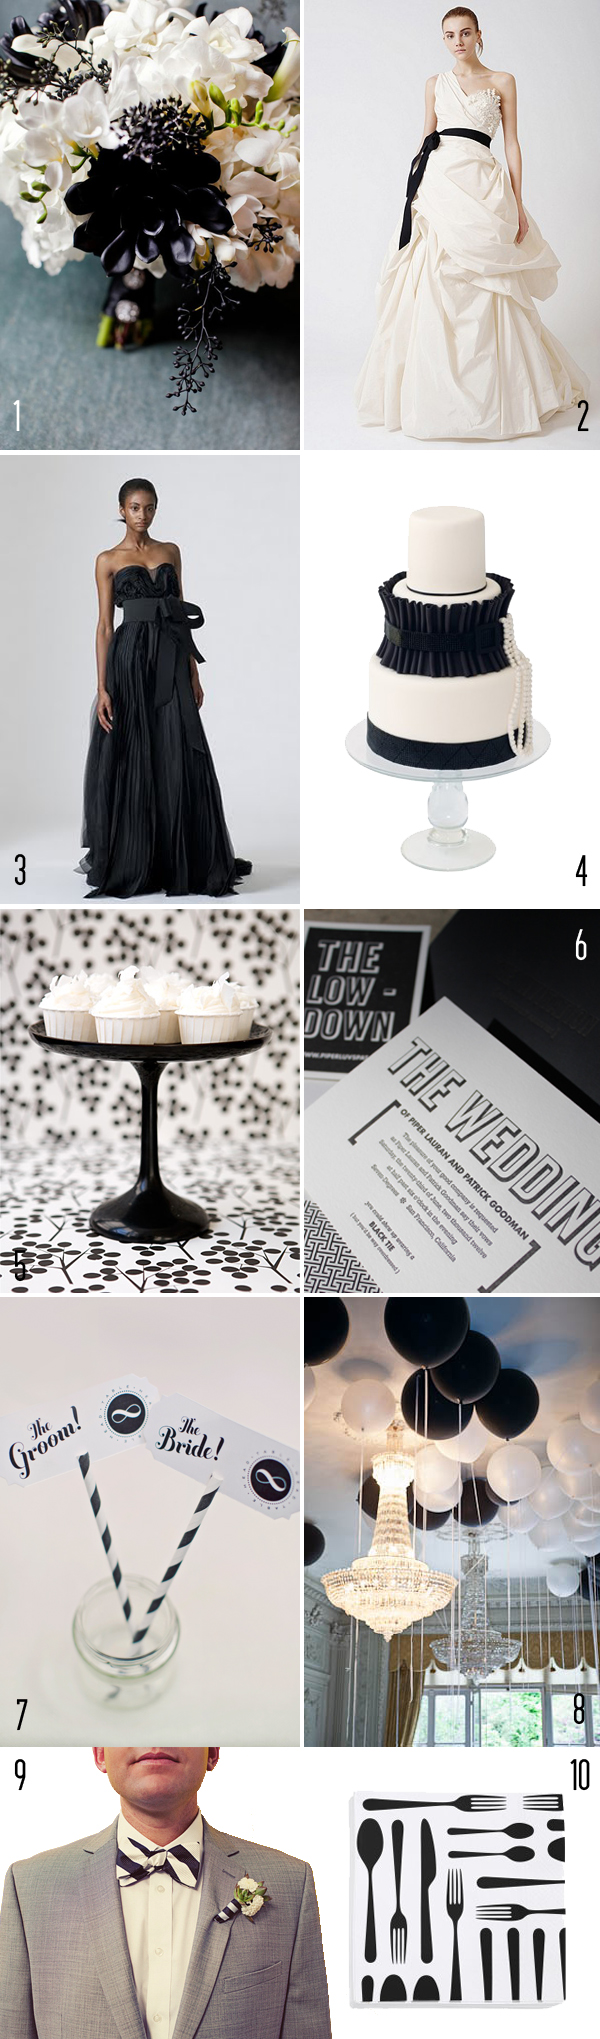 Top 10: Black and white details